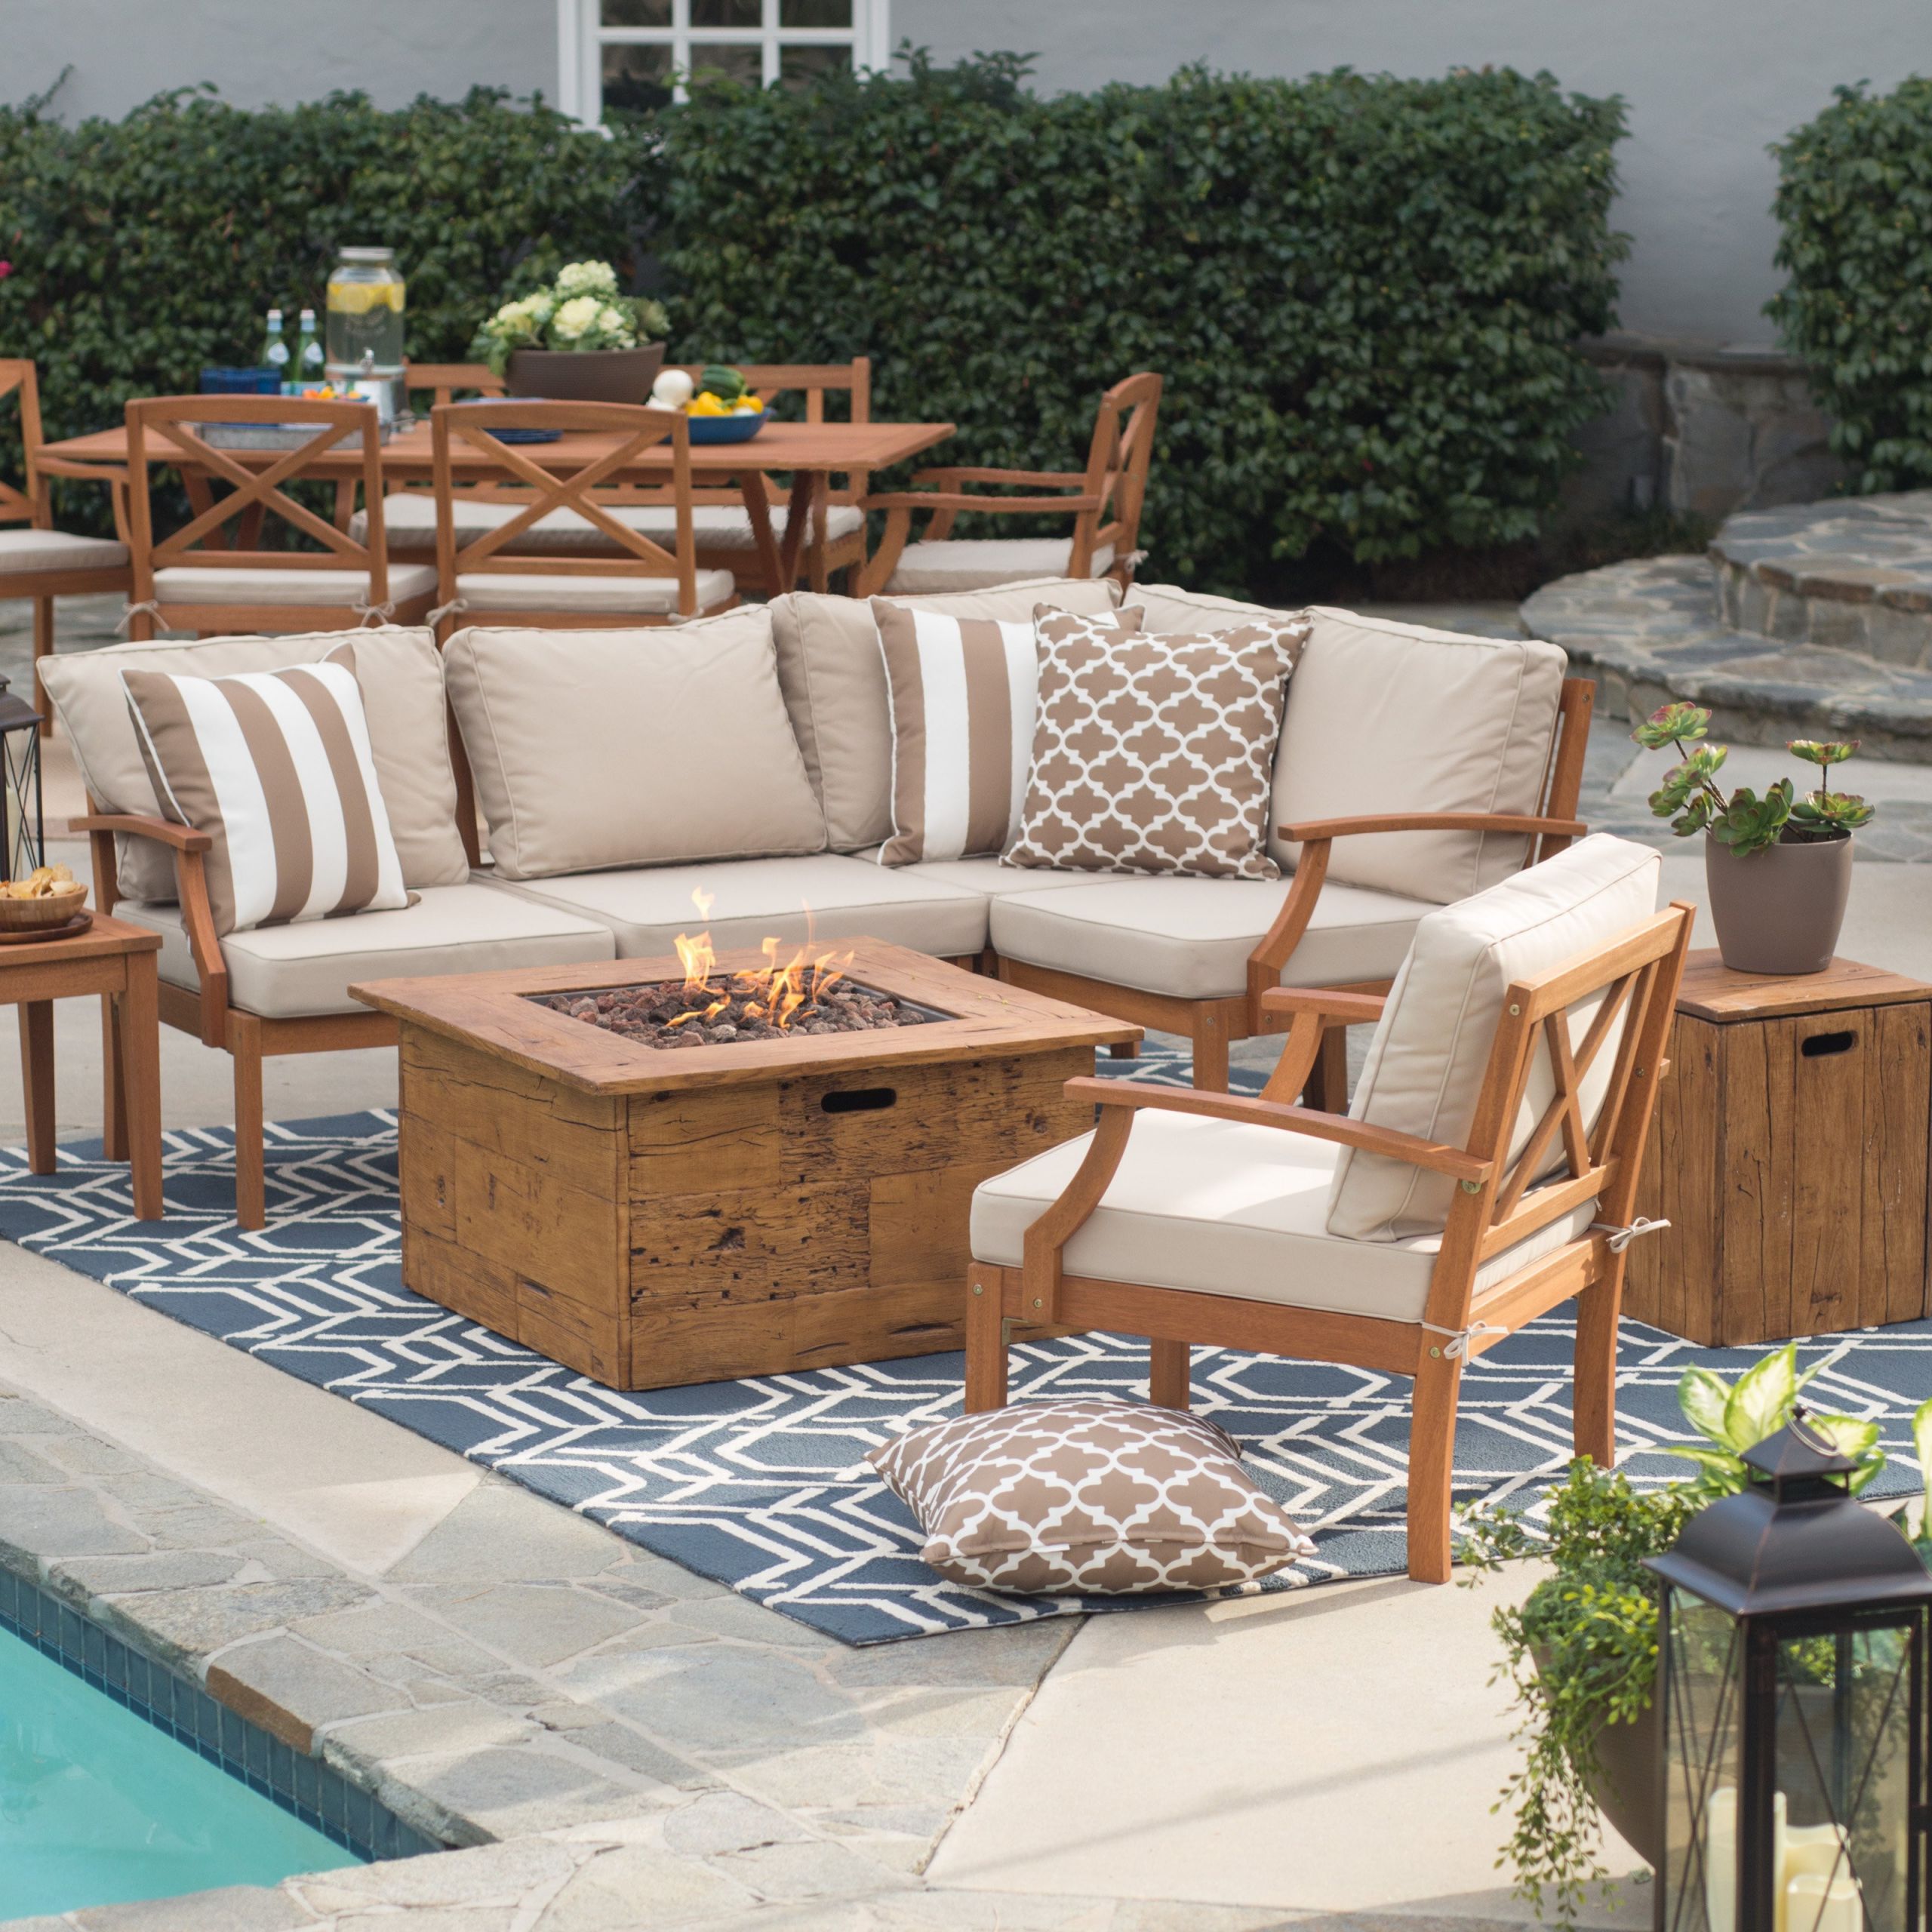 Patio Set With Fire Pit
 Belham Living Brighton Outdoor Wood Conversation Set with